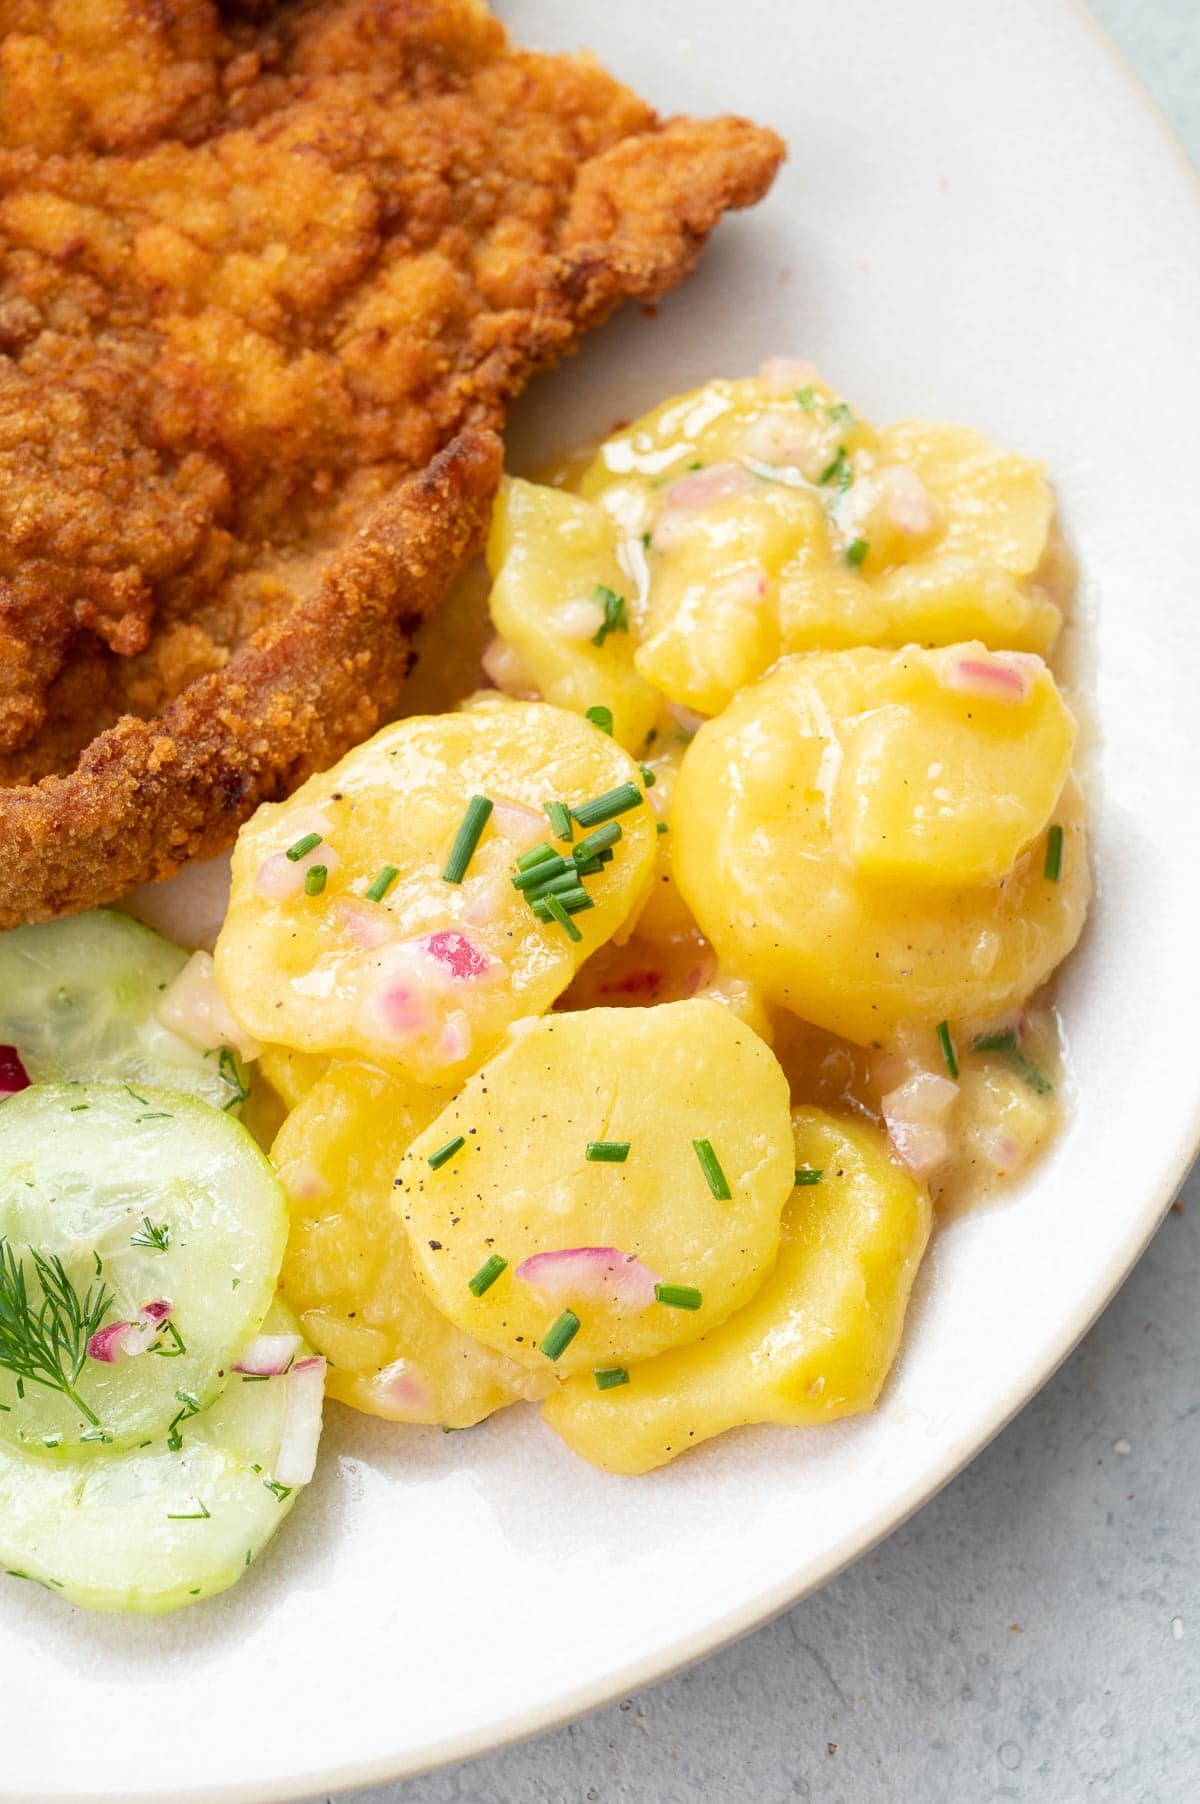 A close up photo of Austrian potato salad served with schnitzel and cucumber salad on a beige plate.